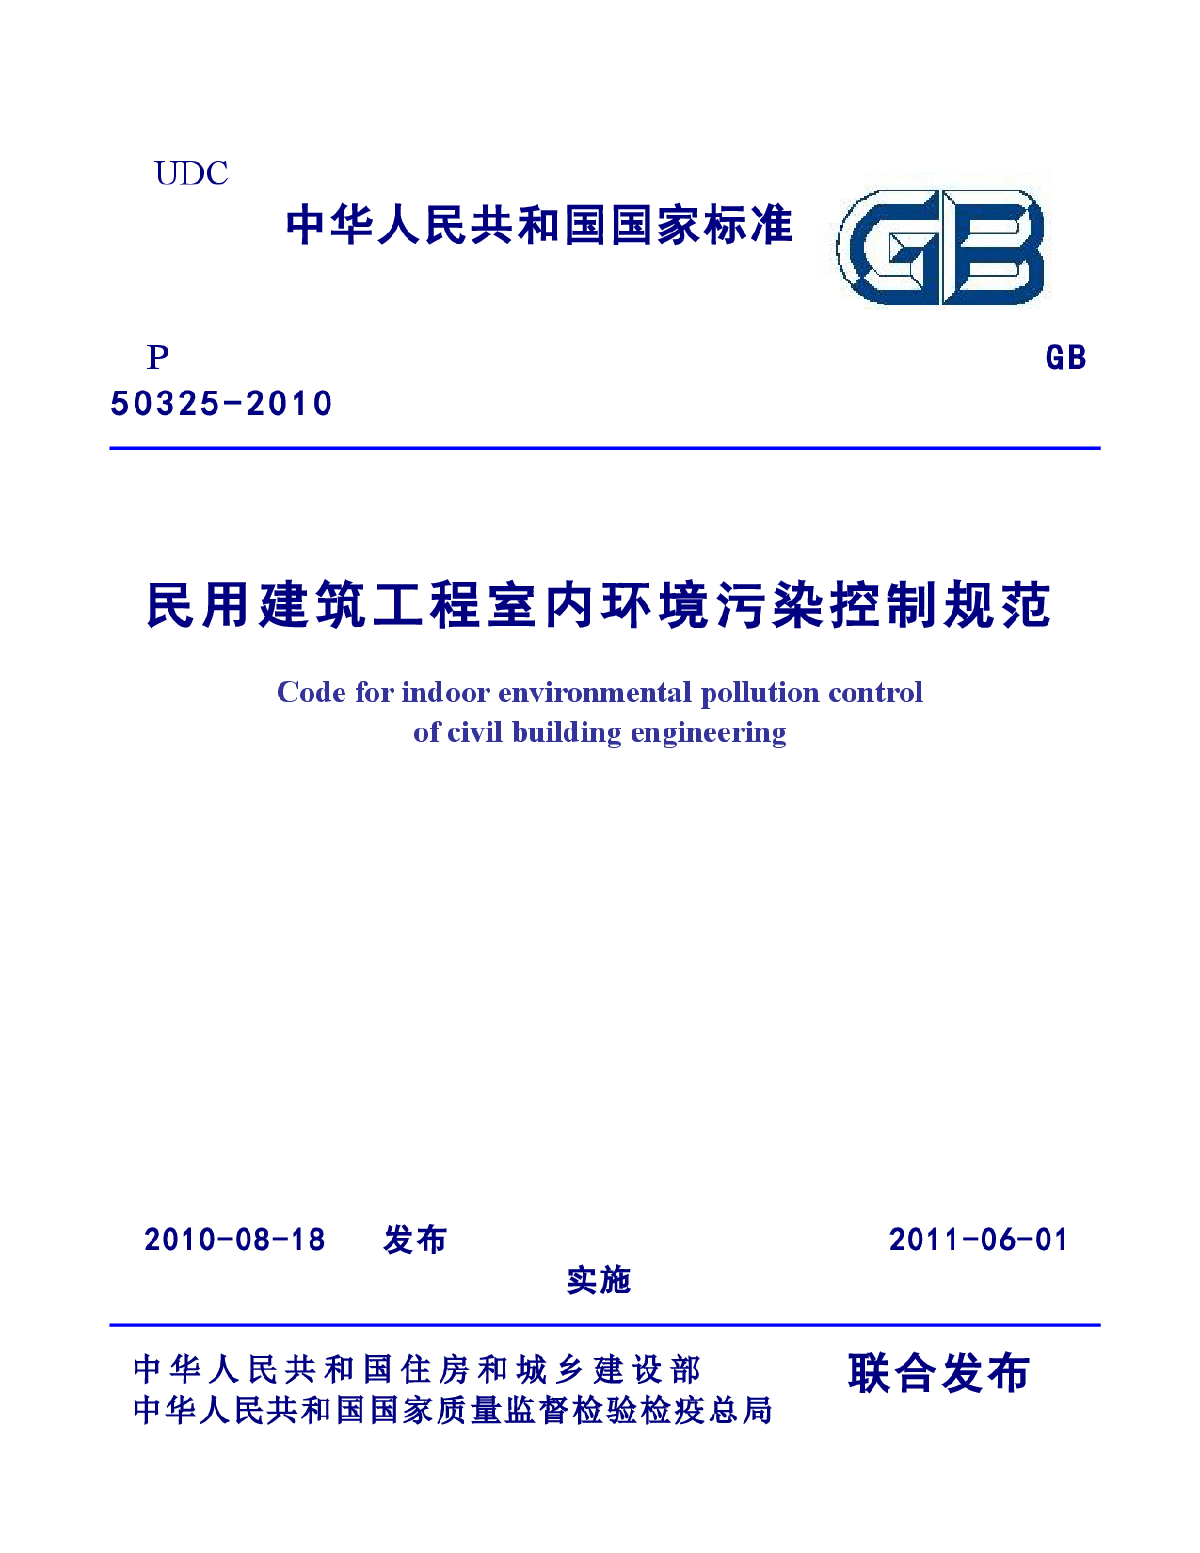  Code for Indoor Environmental Pollution Control of Civil Building Engineering GB 50325-2010 - Figure 1